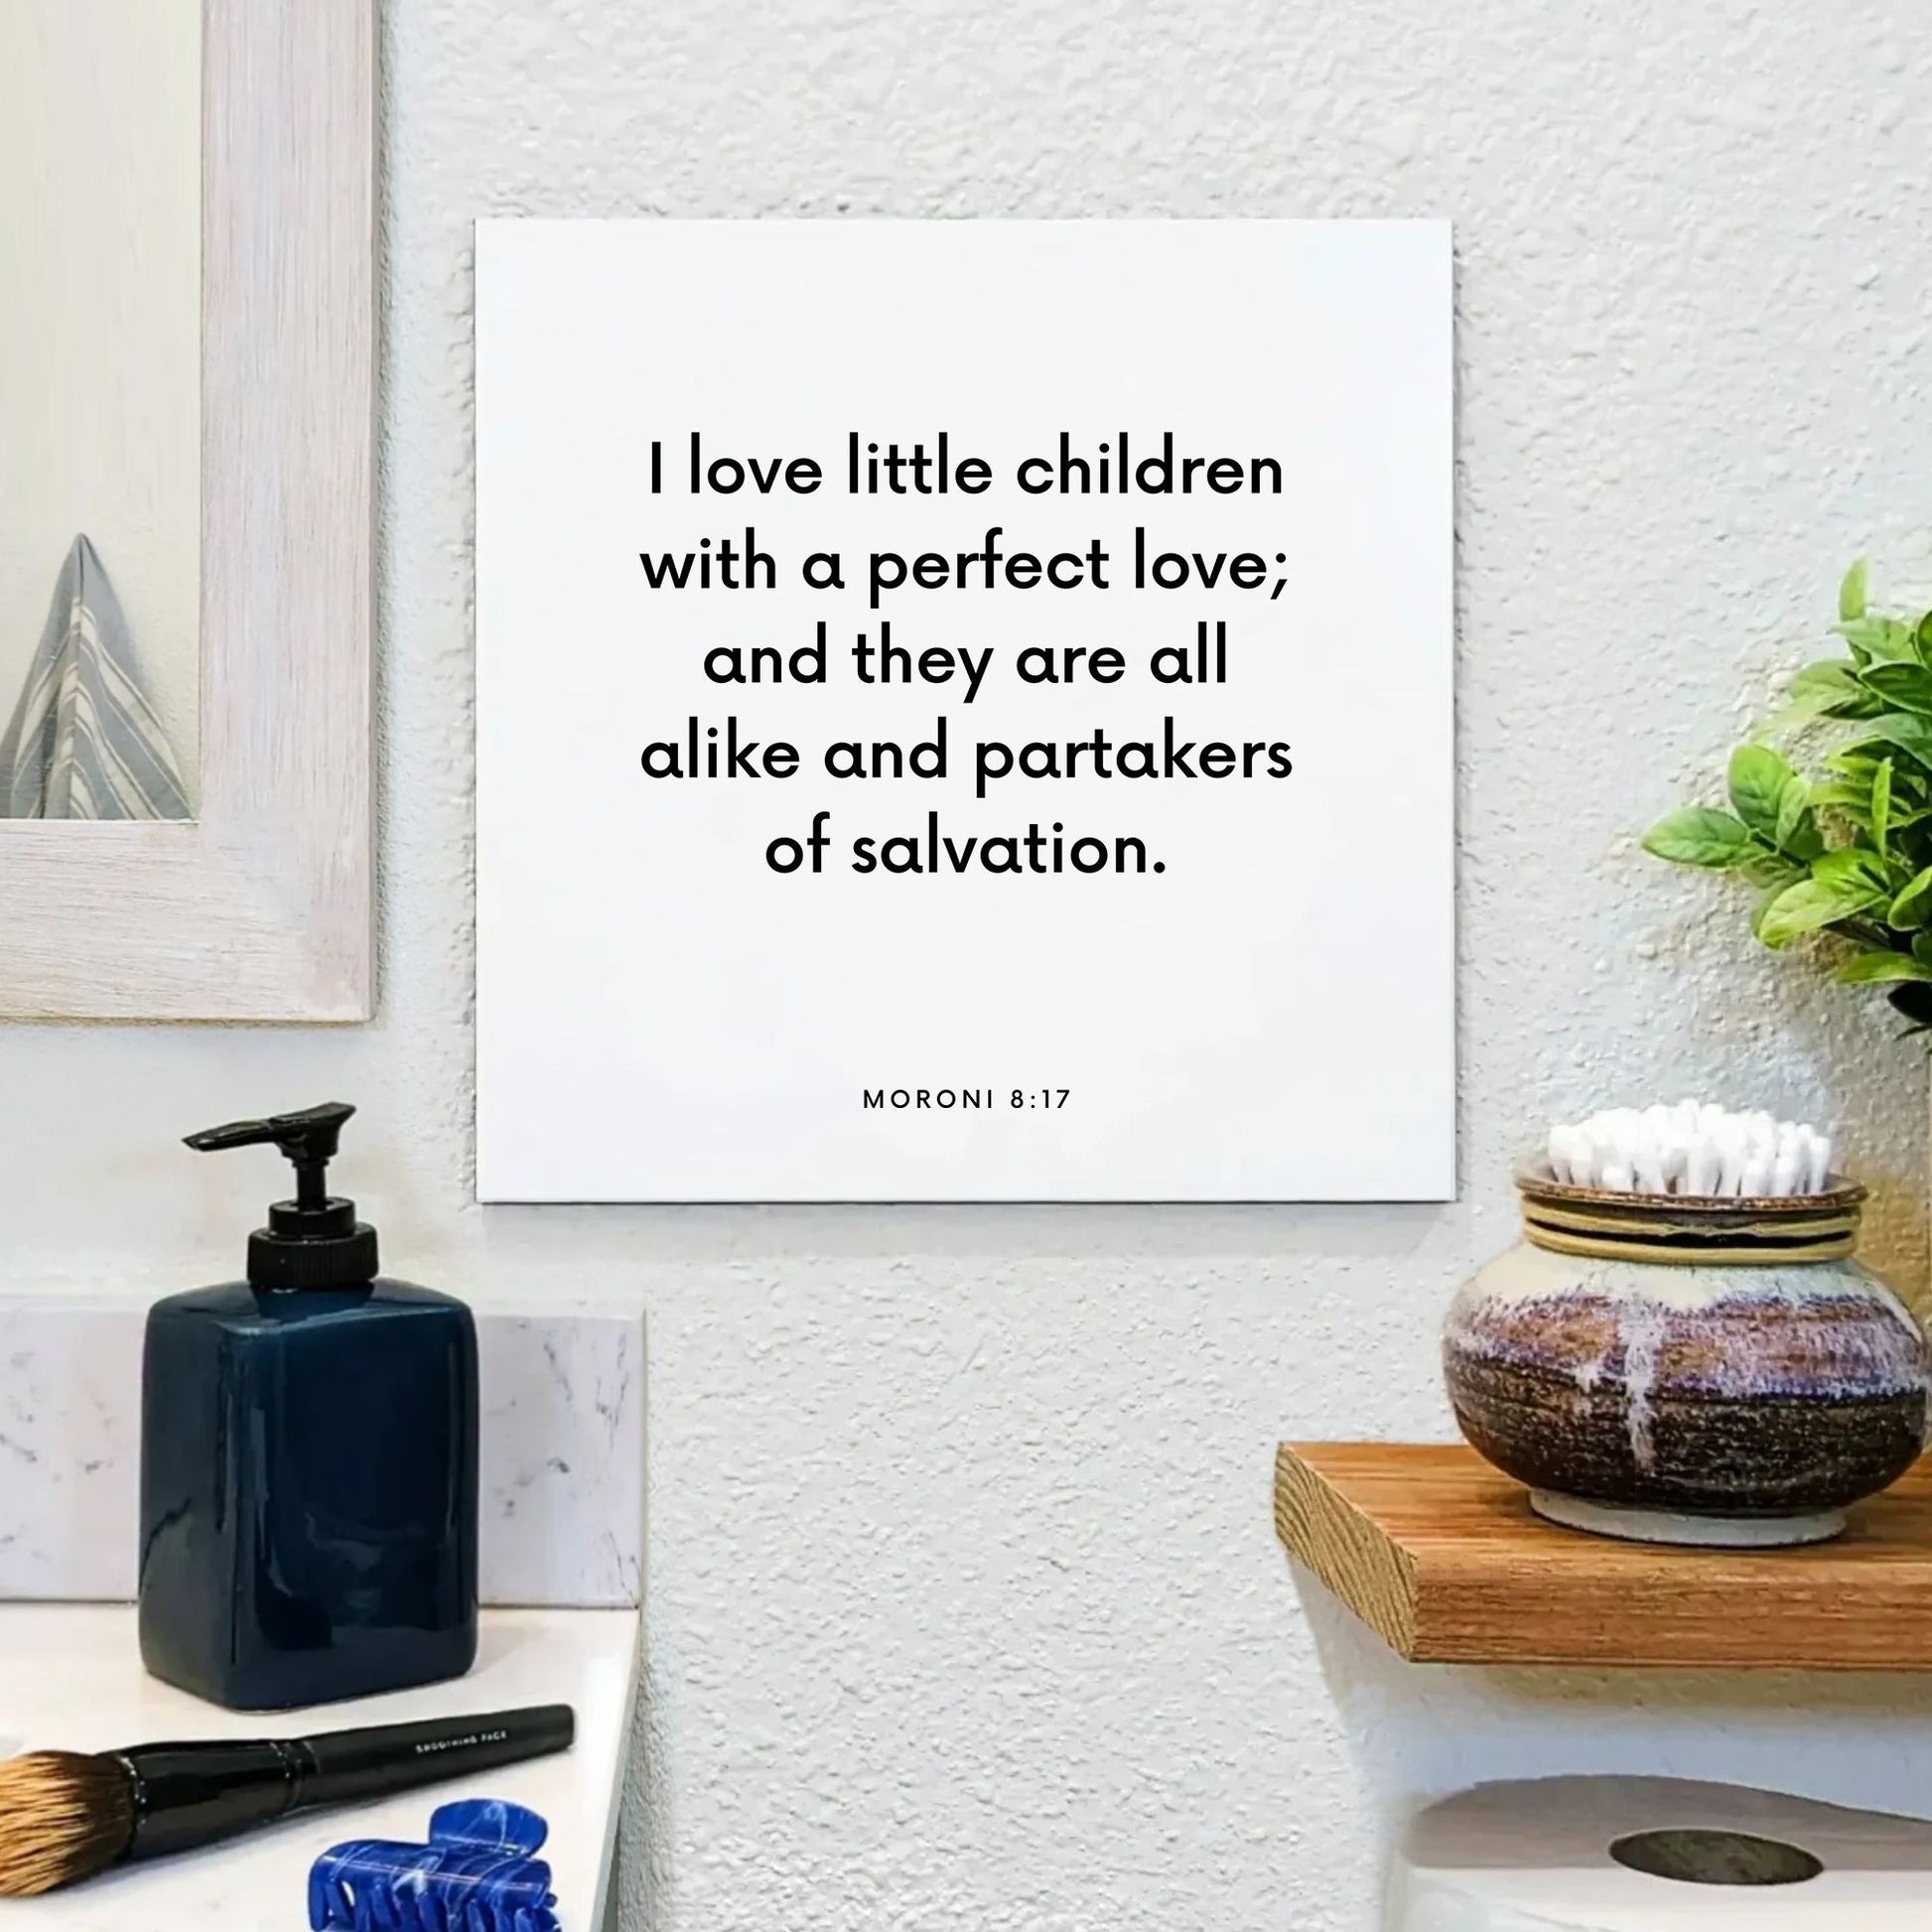 Bathroom mouting of the scripture tile for Moroni 8:17 - "I love little children with a perfect love"